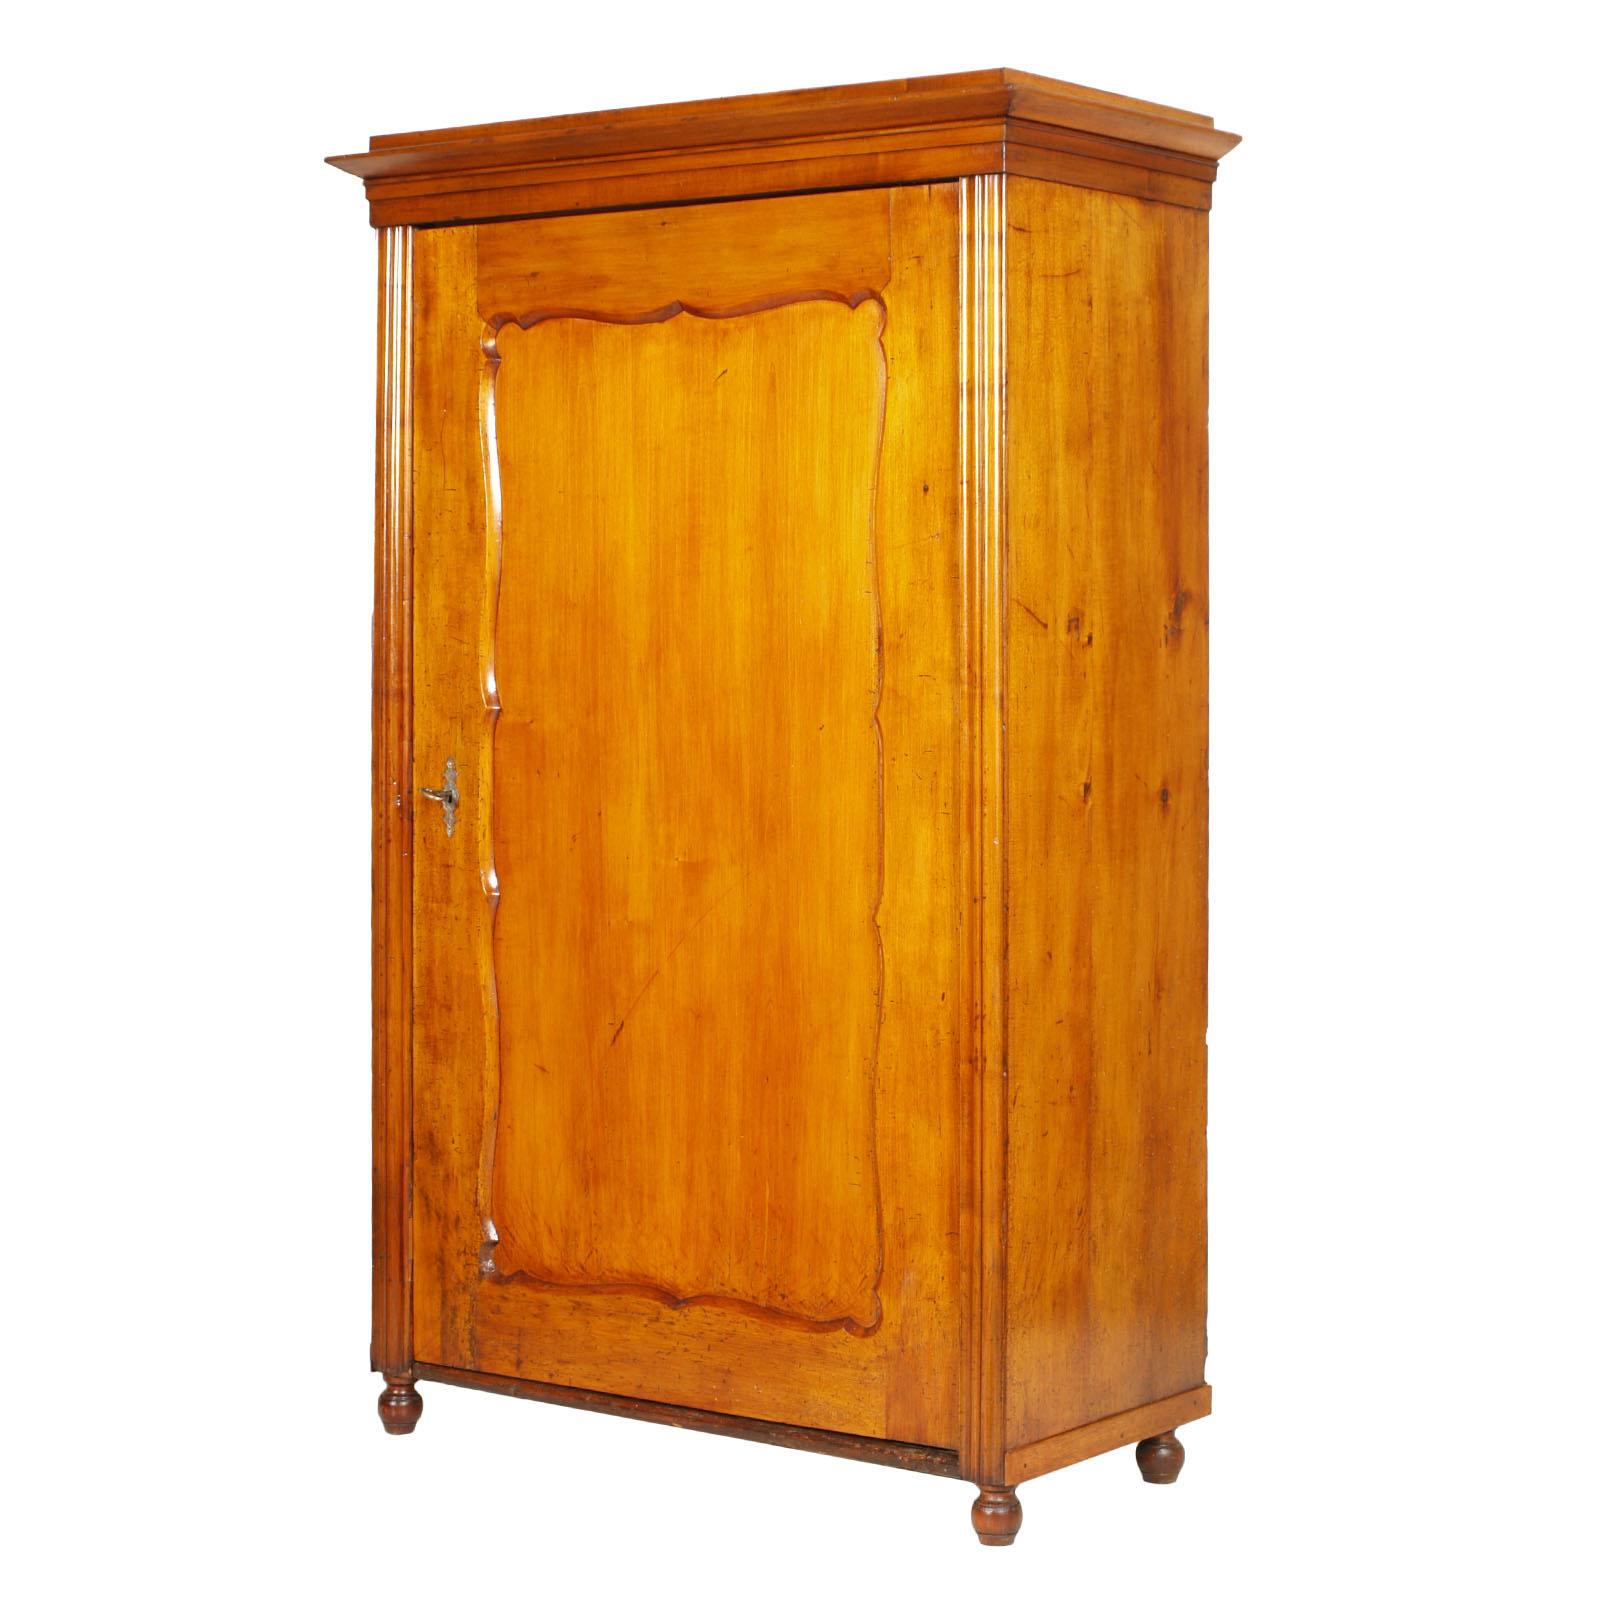 Precious, very rare and hard to find Viennese 19th century Biedermeier cupboard wardrobe in birch, polished to wax.
Attention: the opening direction of the door is as shown in the second photo, i.e. hinges on the right

Measures cm: H 175, W 110, D